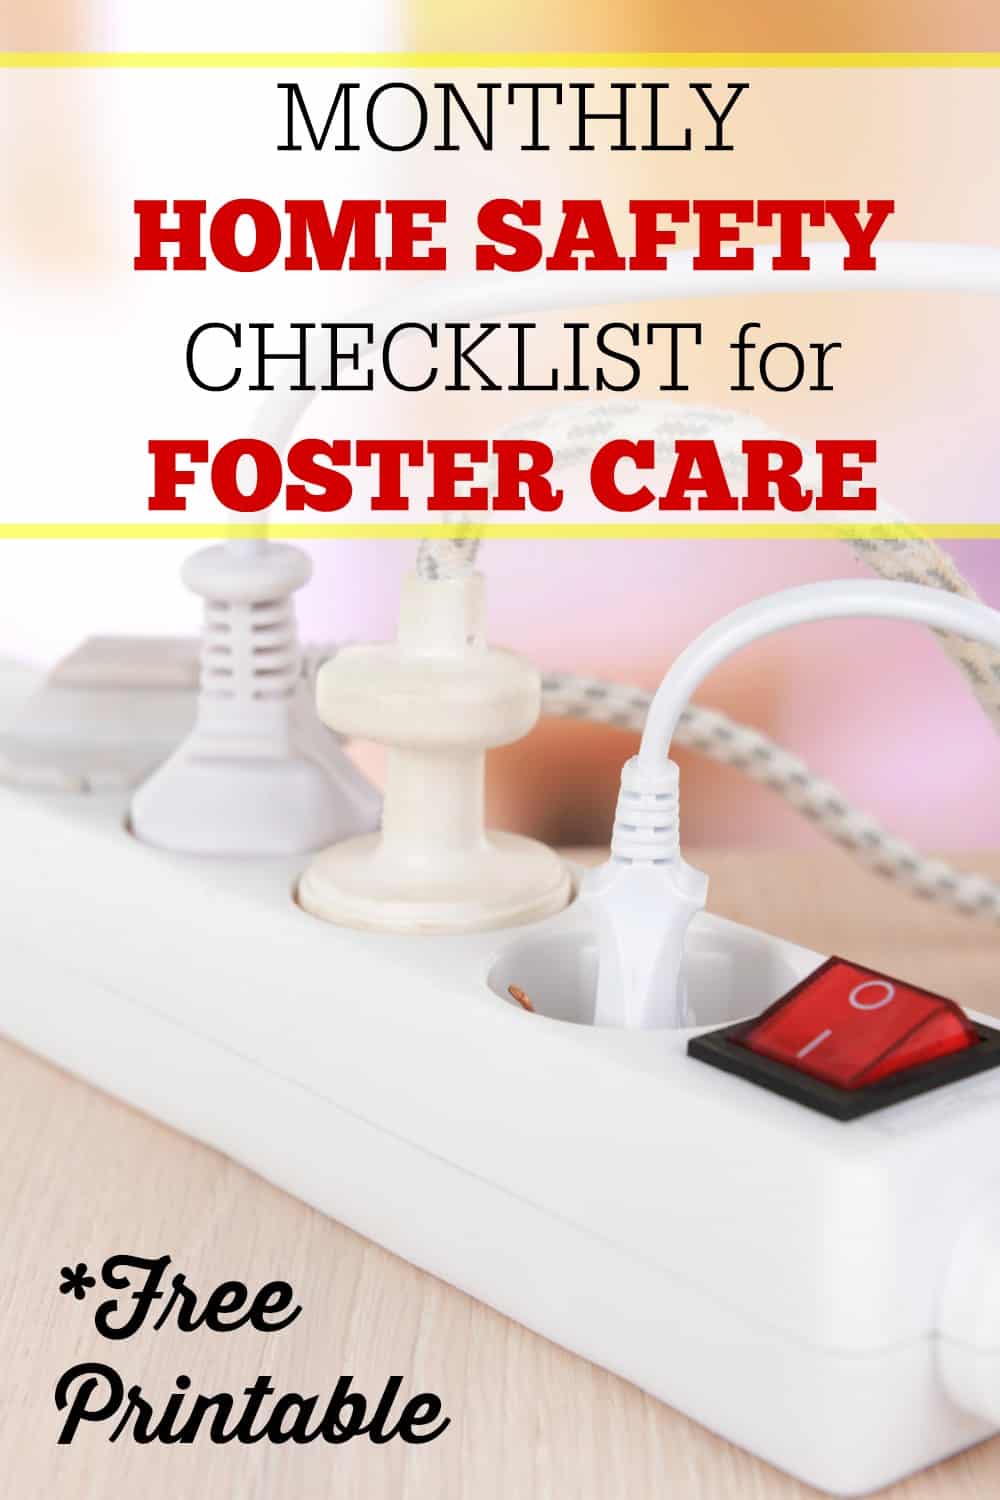 Free printable monthly home safety checklist for foster homes. Make your case worker's job easier with this checklist. #fostercare #fostertoadopt #adoption | foster care bedroom | foster care home study | foster parenting | foster care checklist | foster care printable | foster care tips | foster care adoption | foster home | foster care application